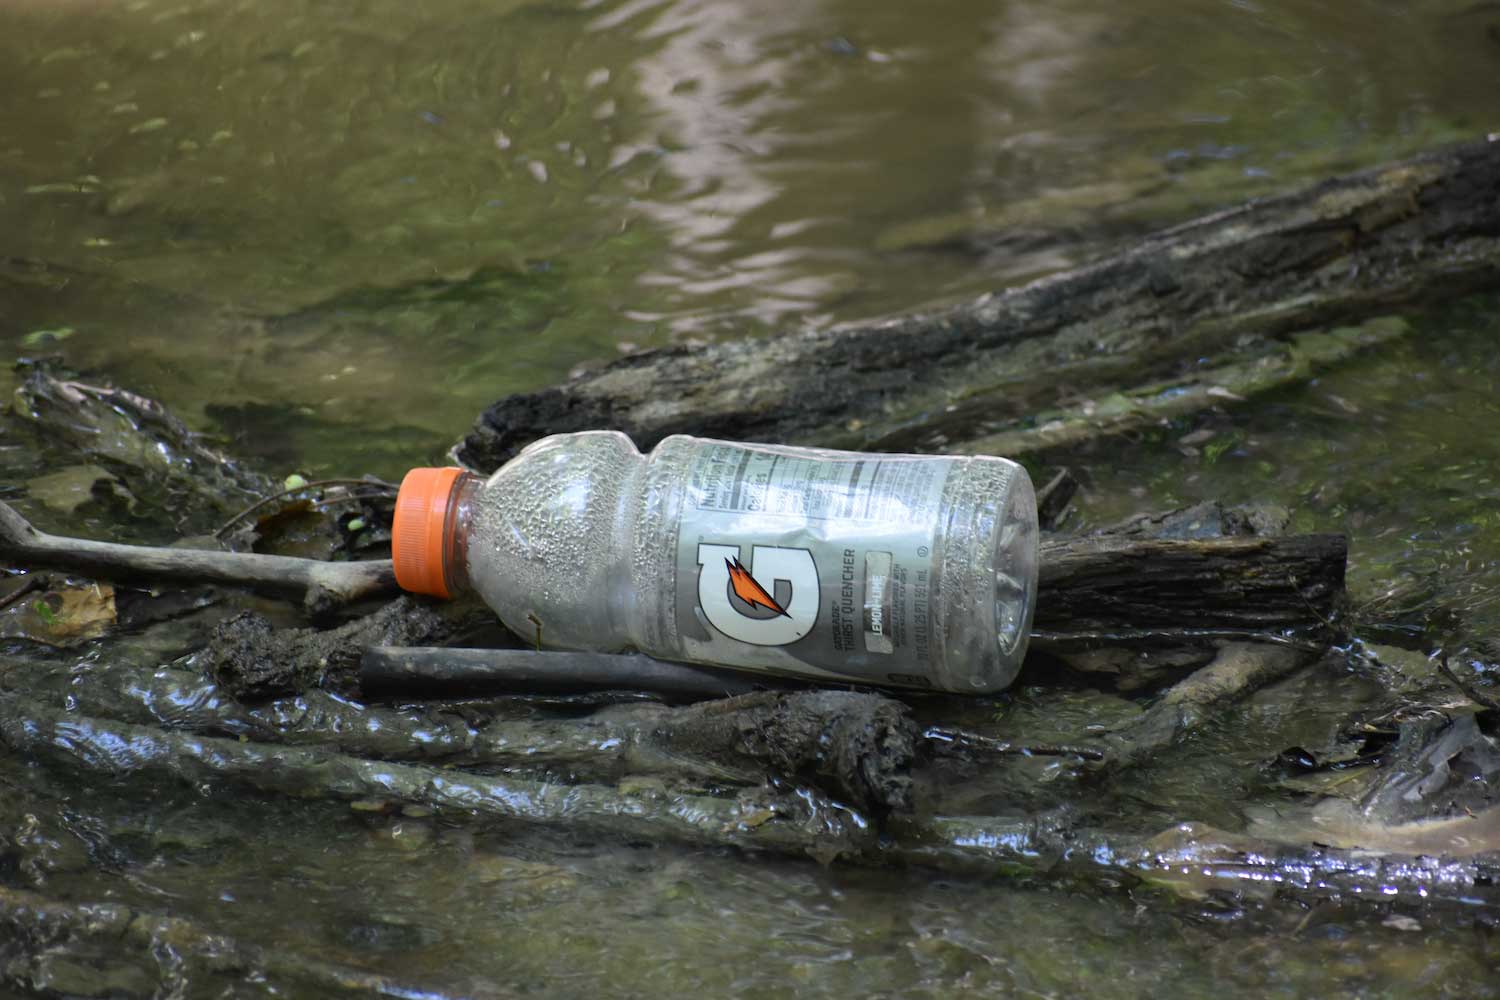 An old Gatorade bottle floating in the water.